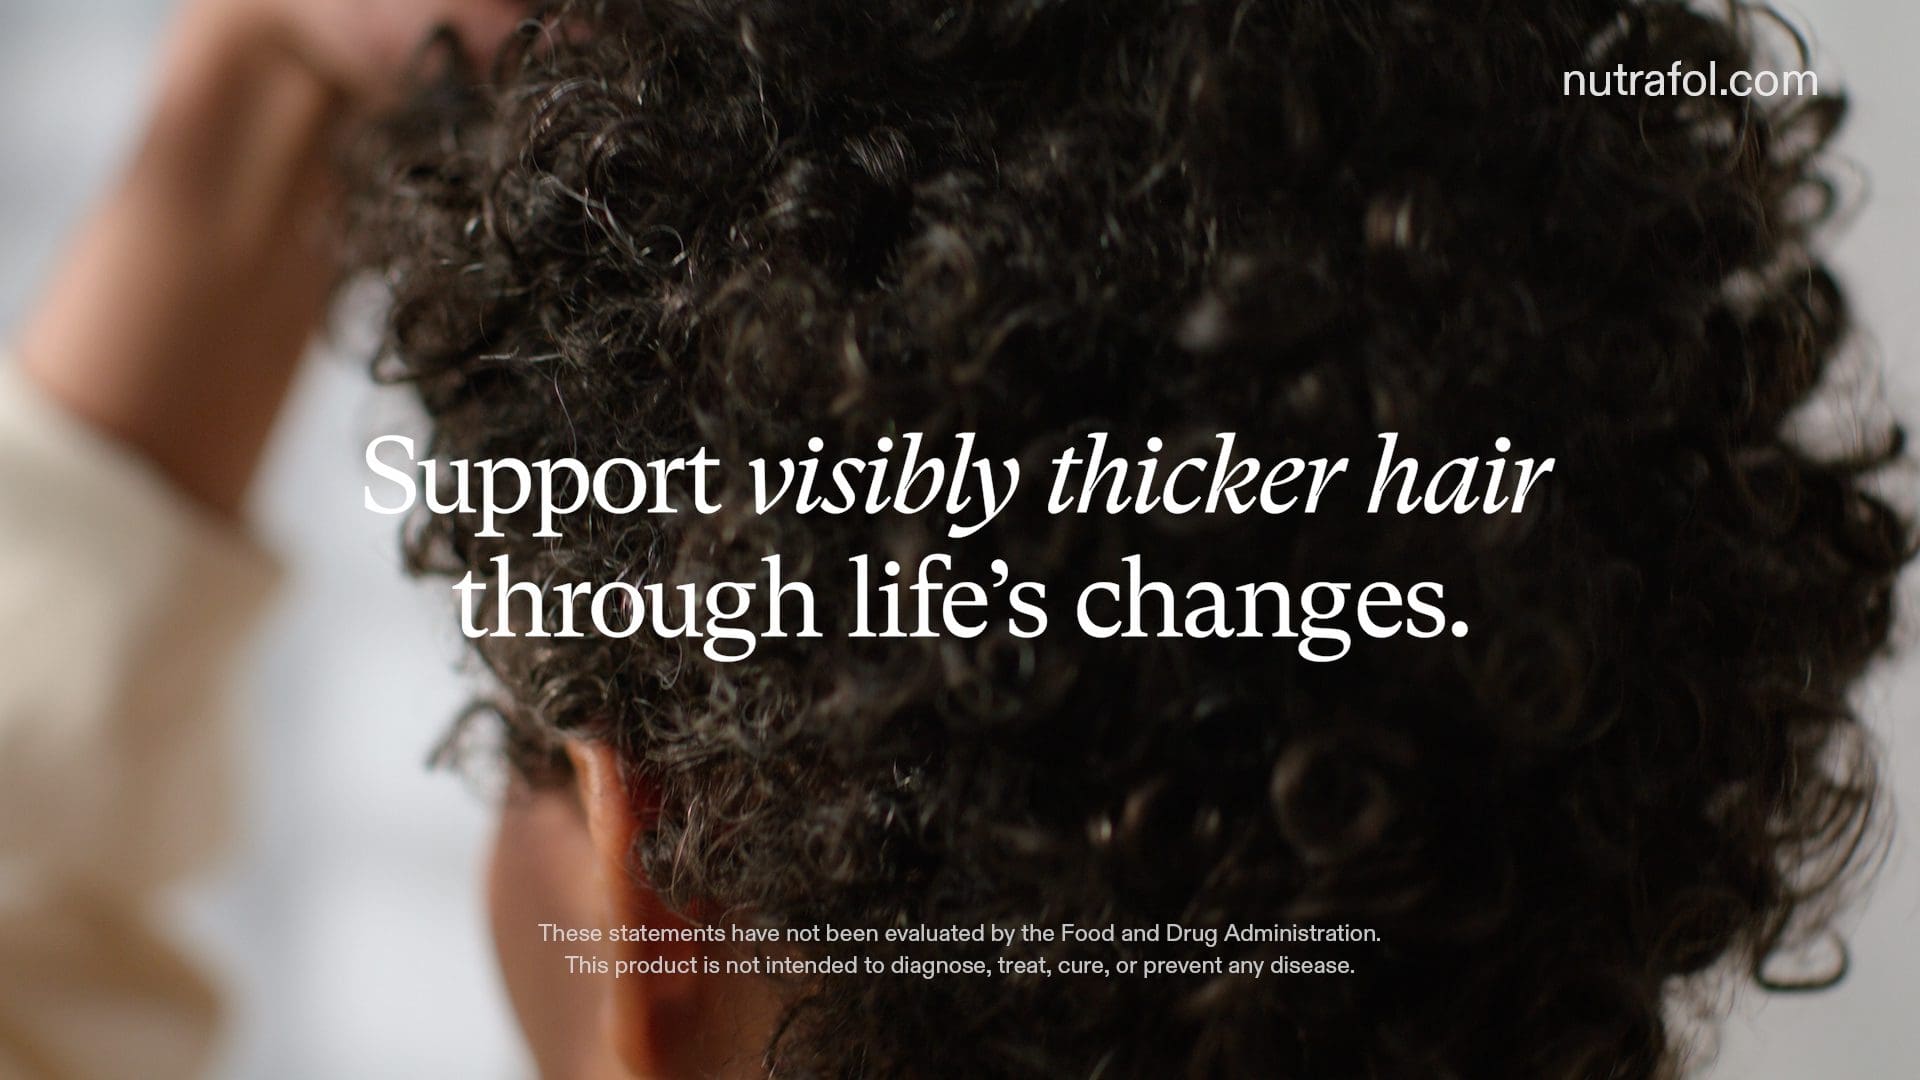 Close-up image of the back of a person's head with curly hair, with text overlay stating 'Support visibly thicker hair through life’s changes' along with the Nutrafol logo and website address nutrafol.com, emphasizing hair wellness.